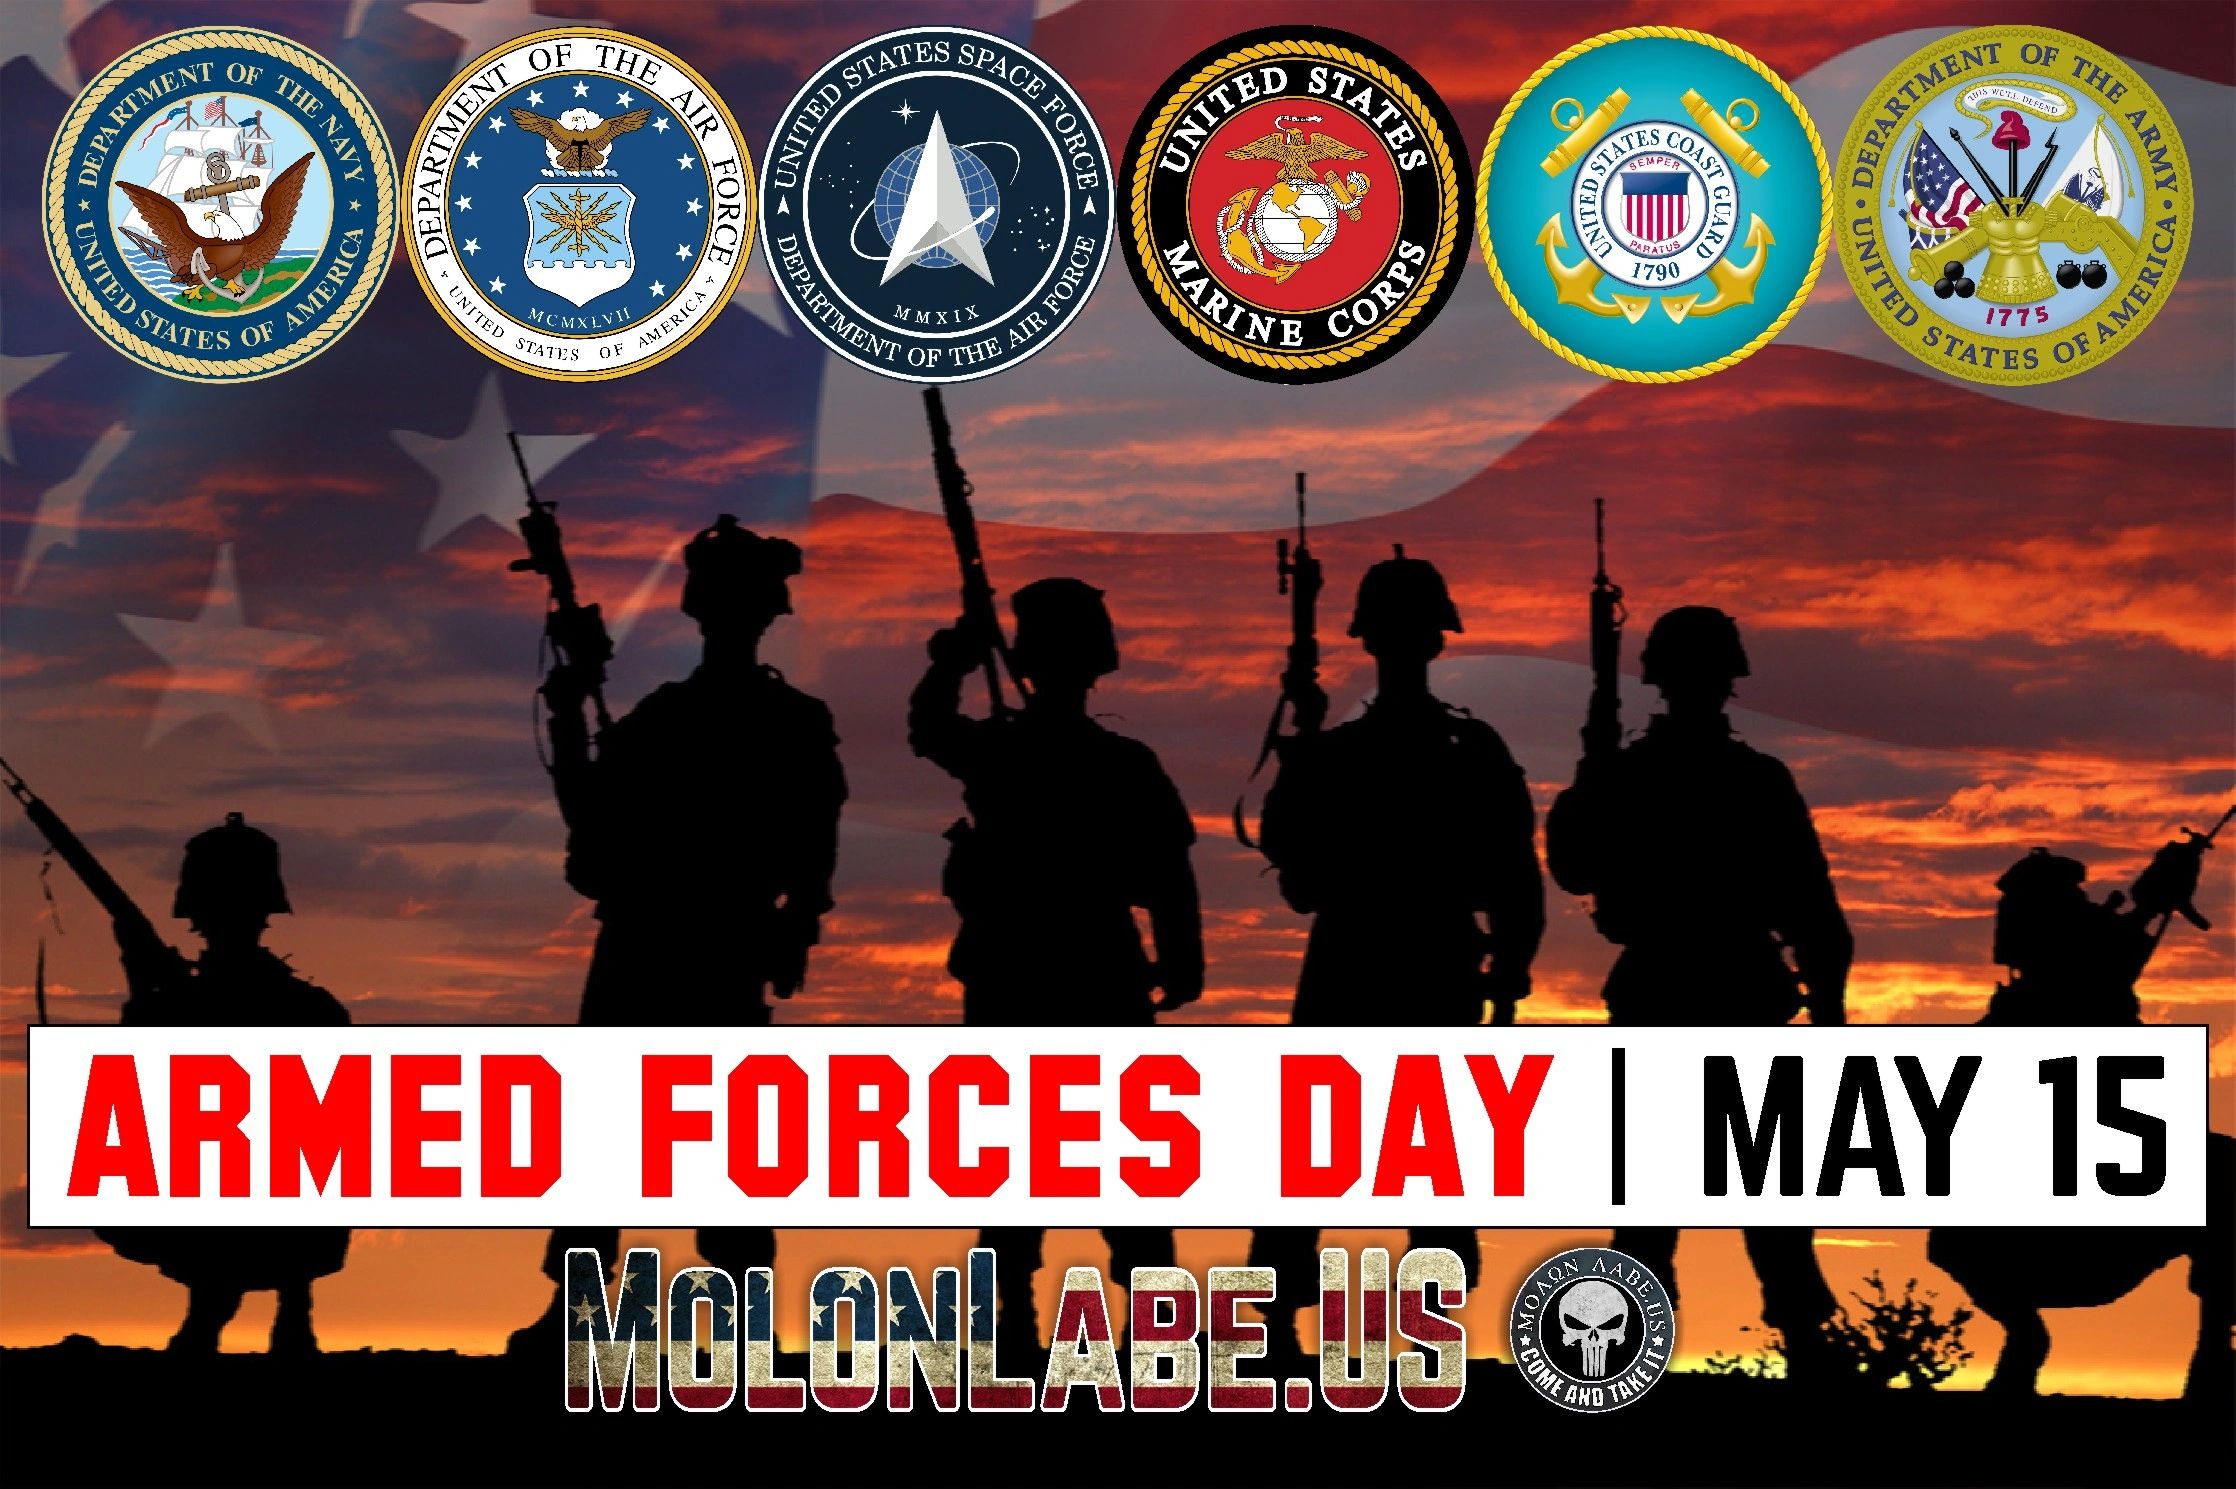 What Armed Forces Day means to me.